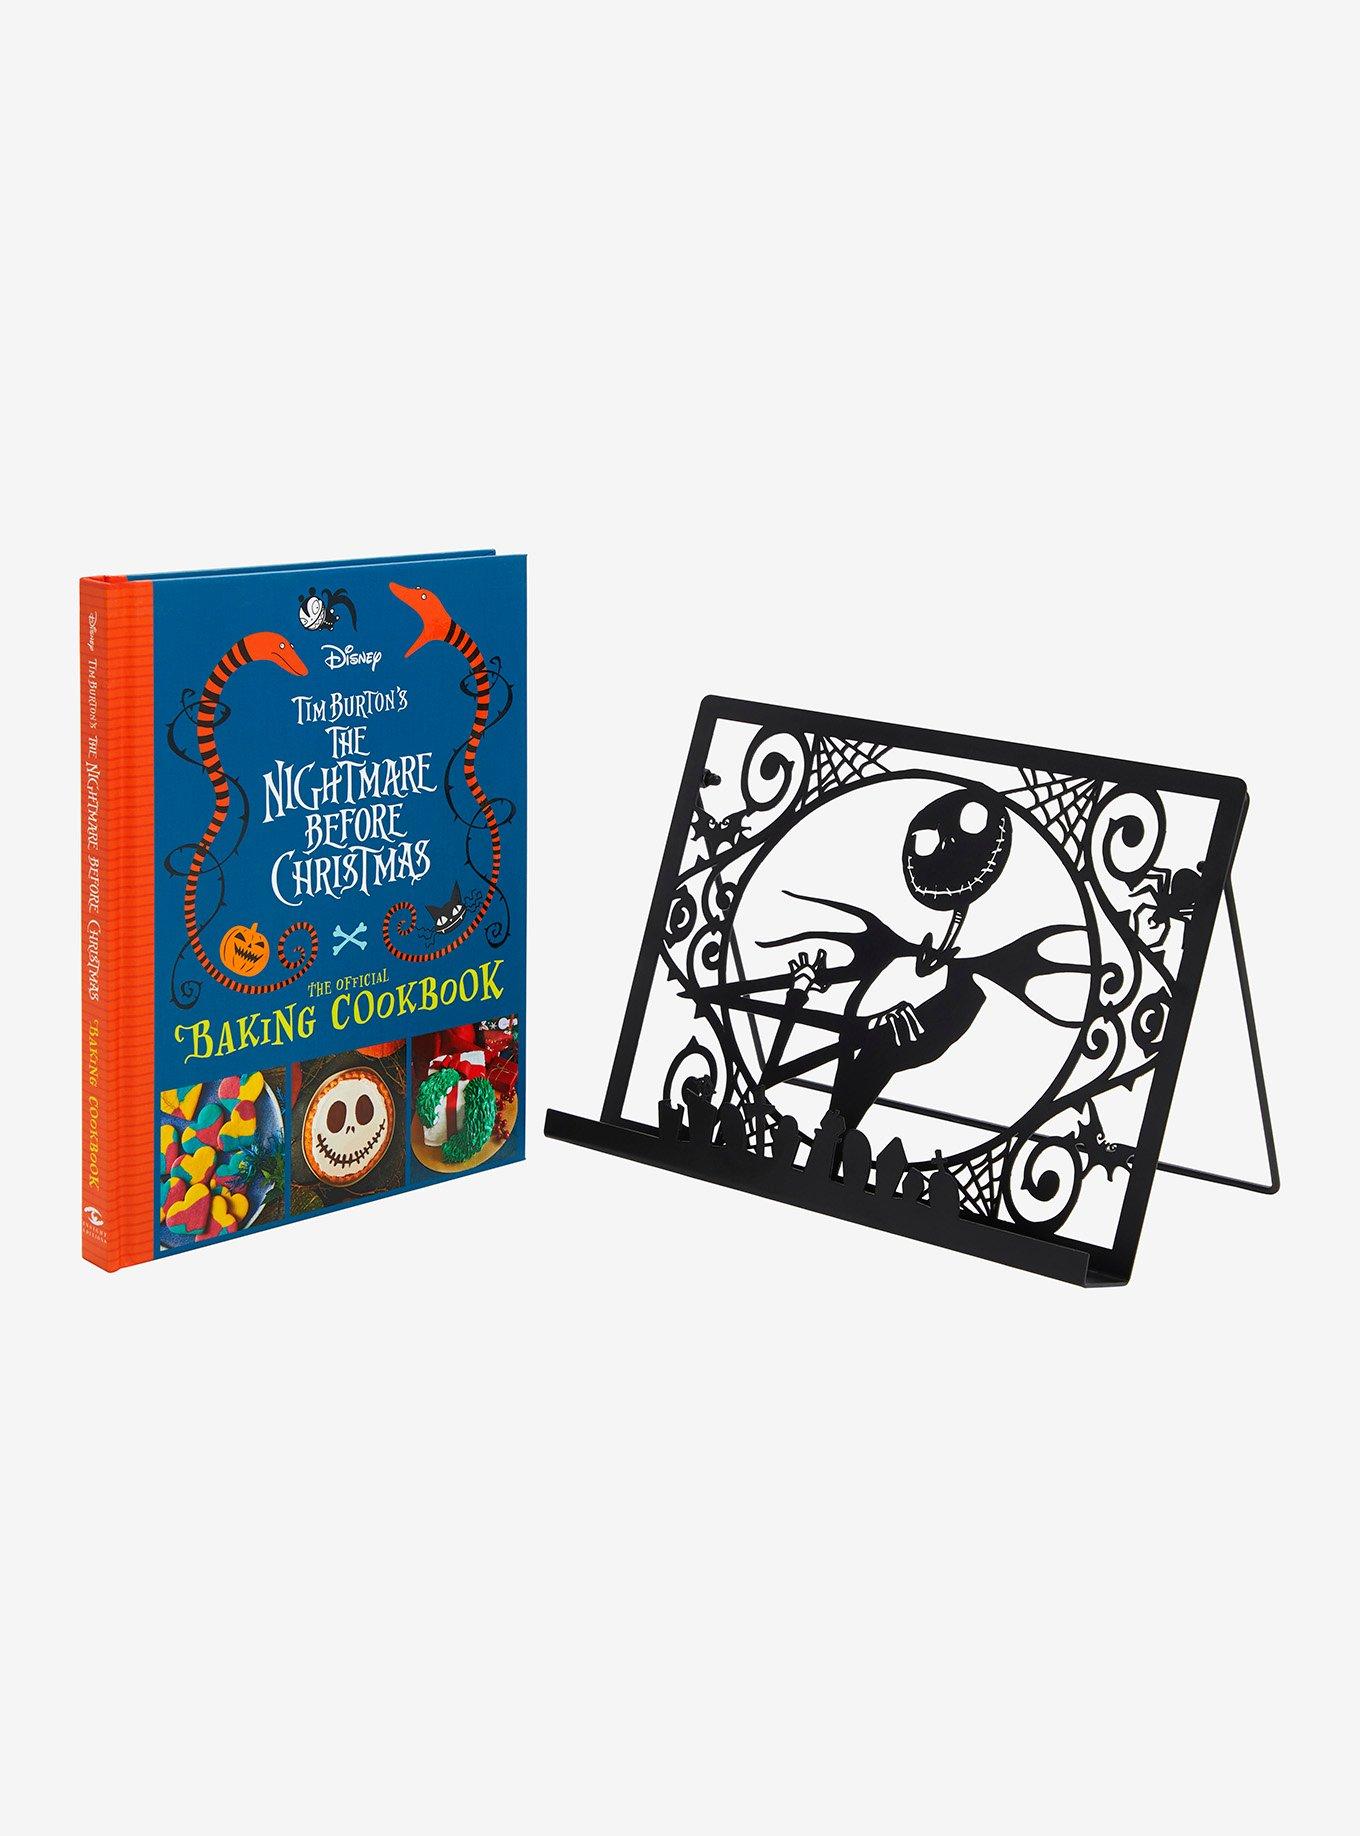 The Nightmare Before Christmas Official Baking Cookbook Gift Set